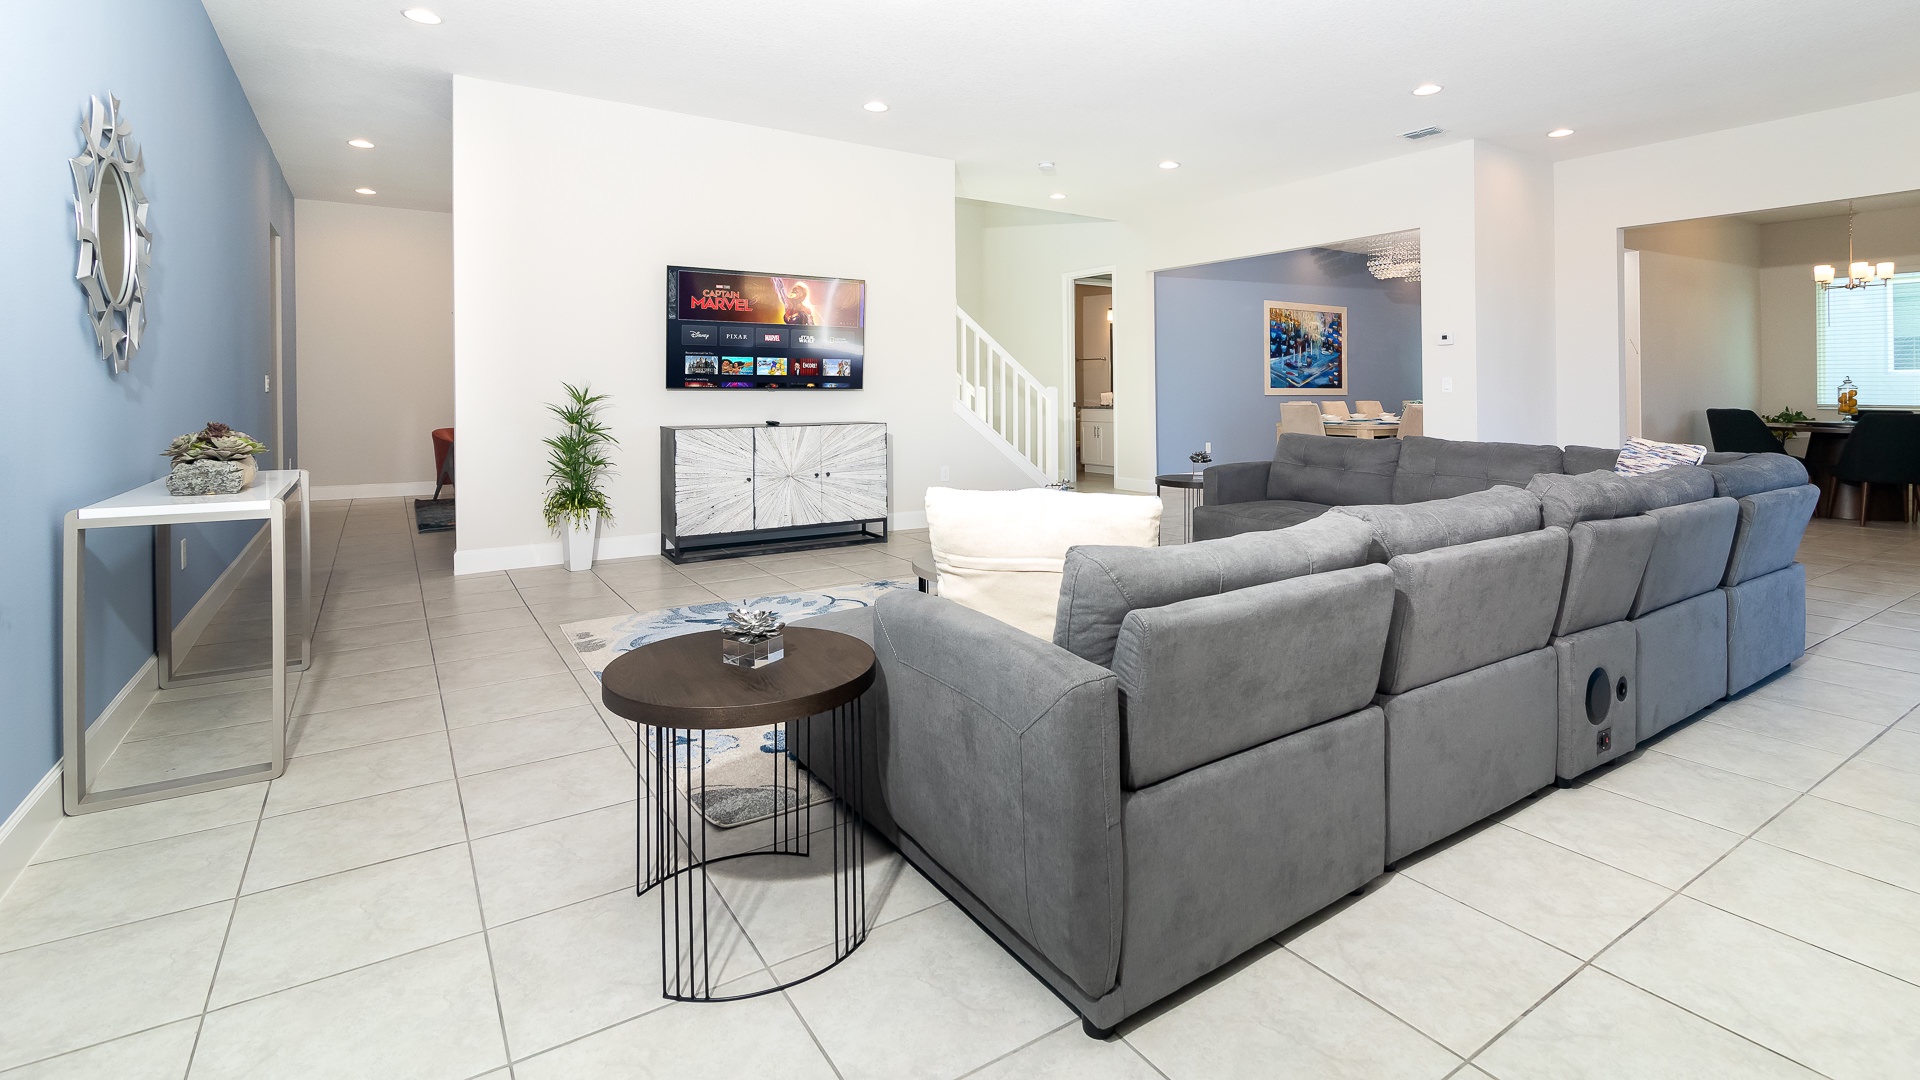 Plush sectional couch and a smart TV, perfect for lounging and catching up on your favorite shows